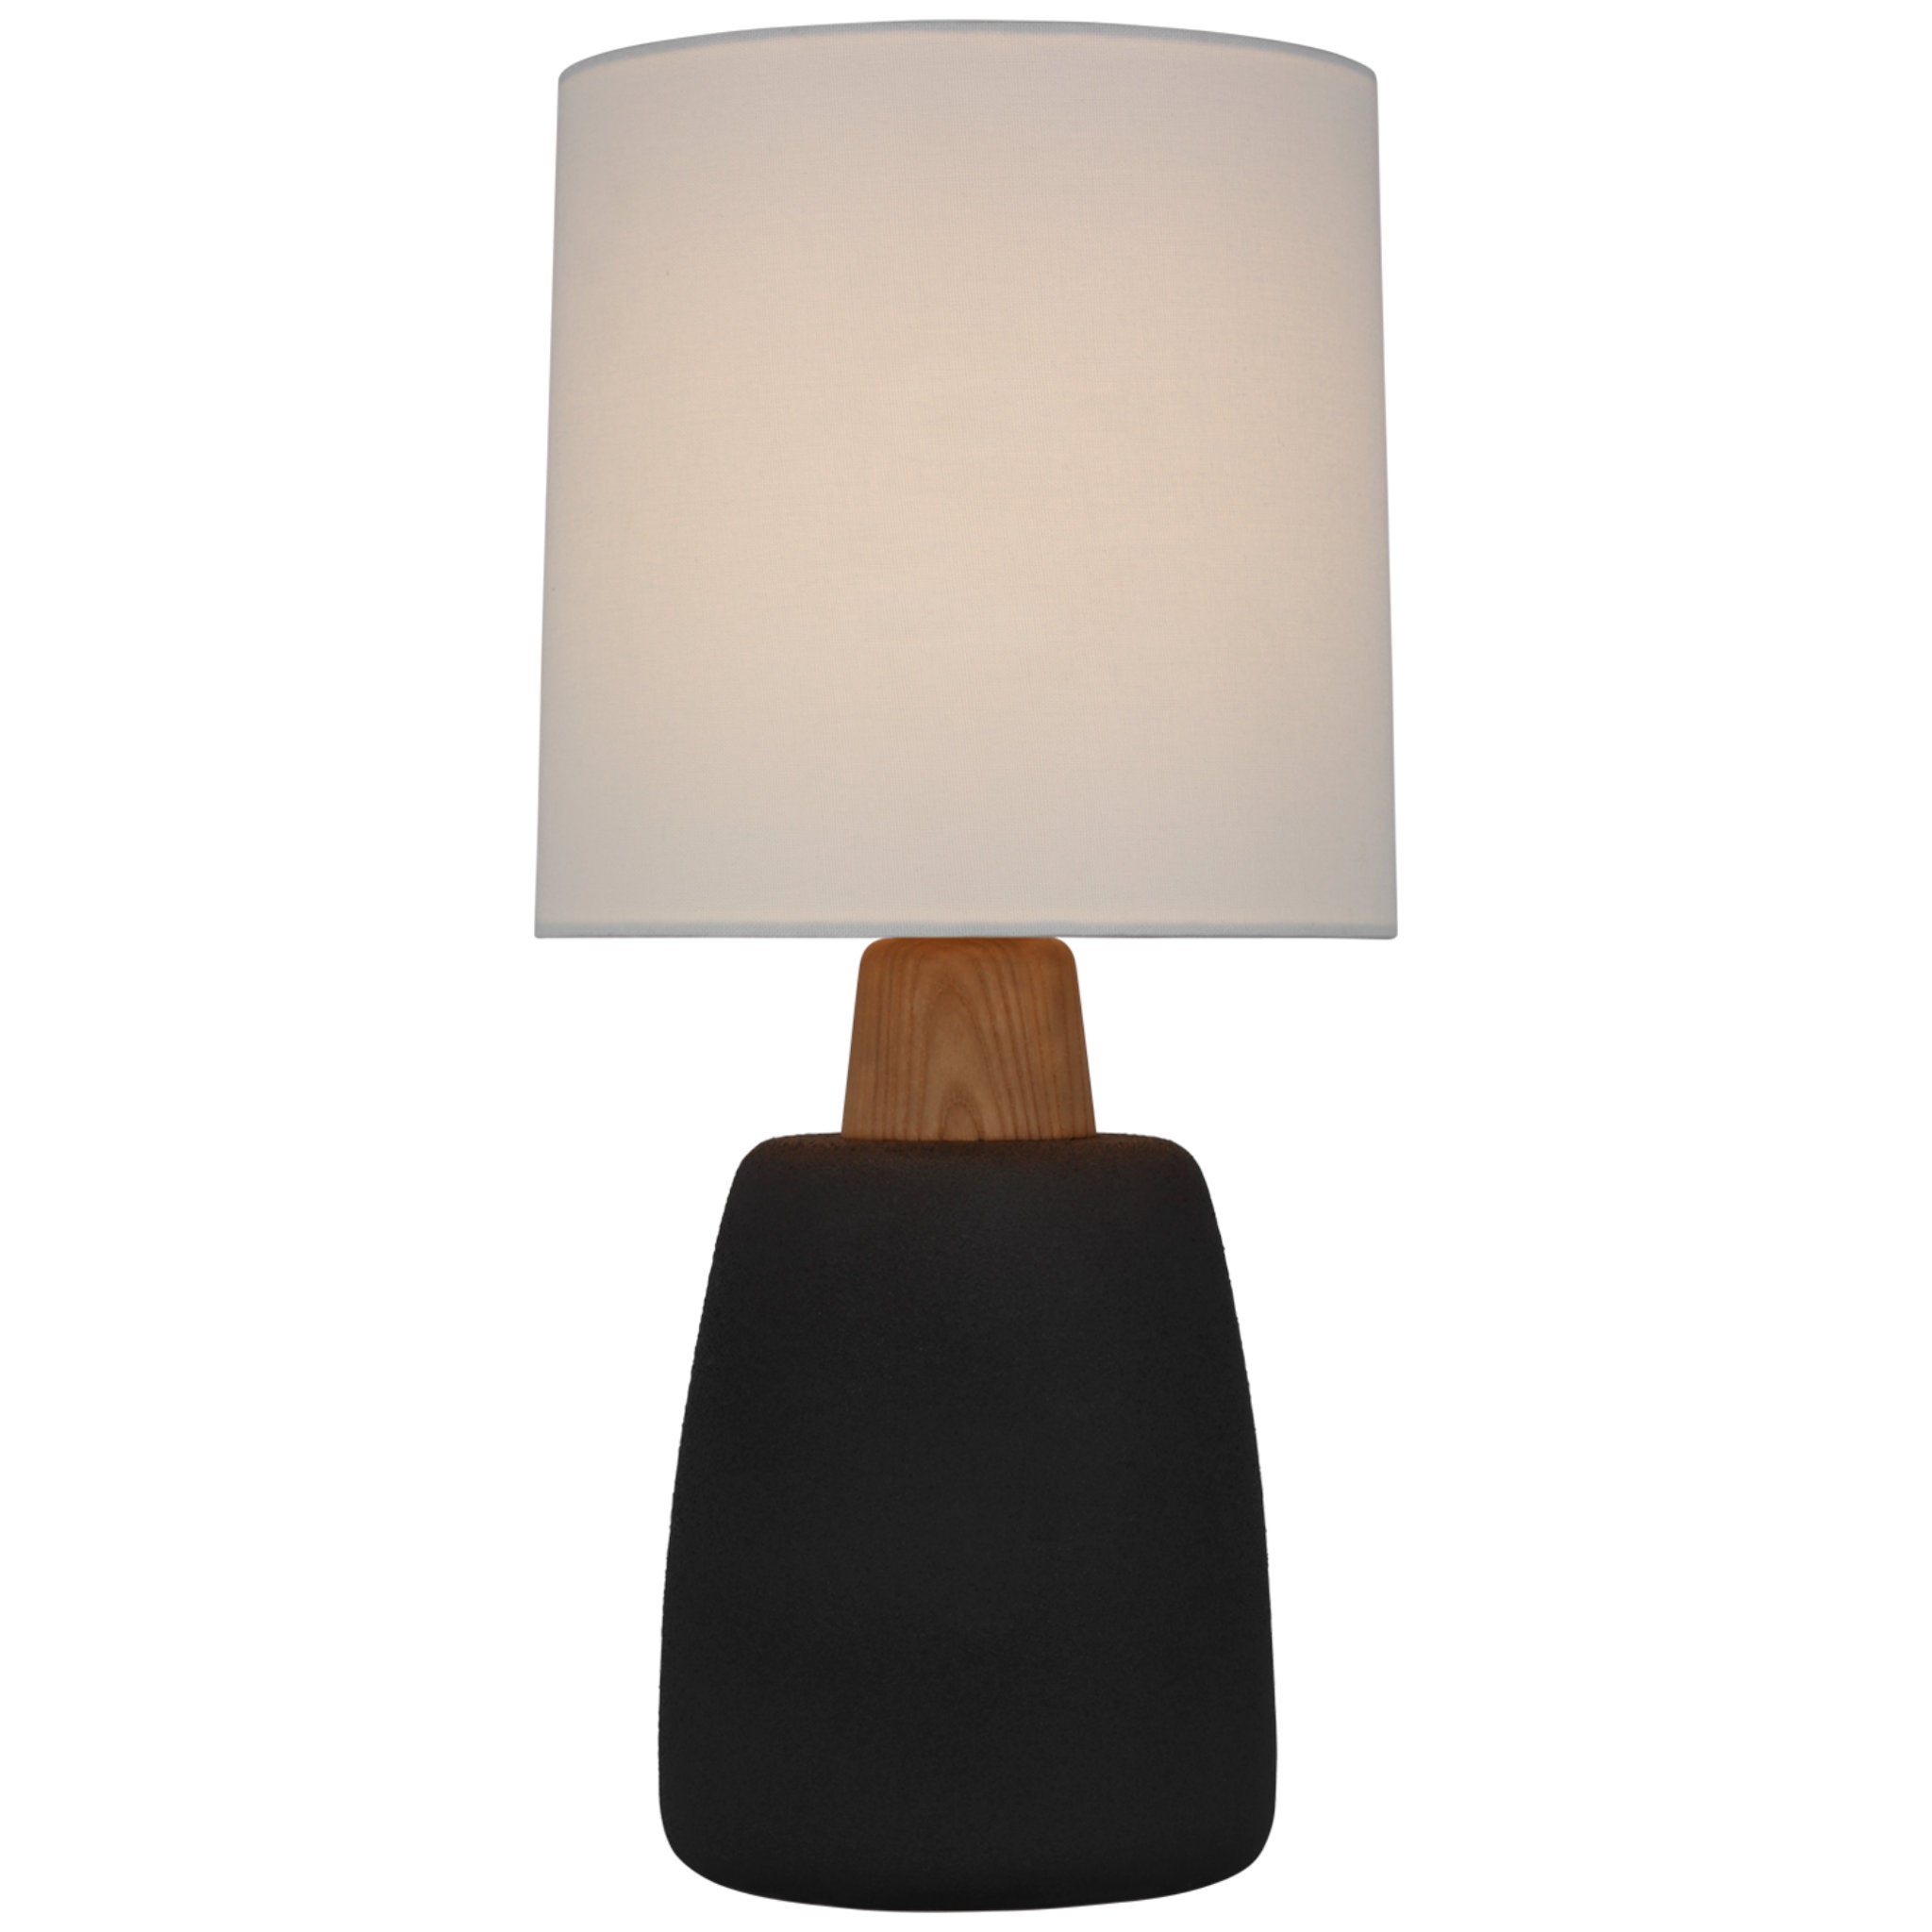 Barbara Barry Aida Medium Table Lamp in Porous Black and Natural Oak with Linen Shade